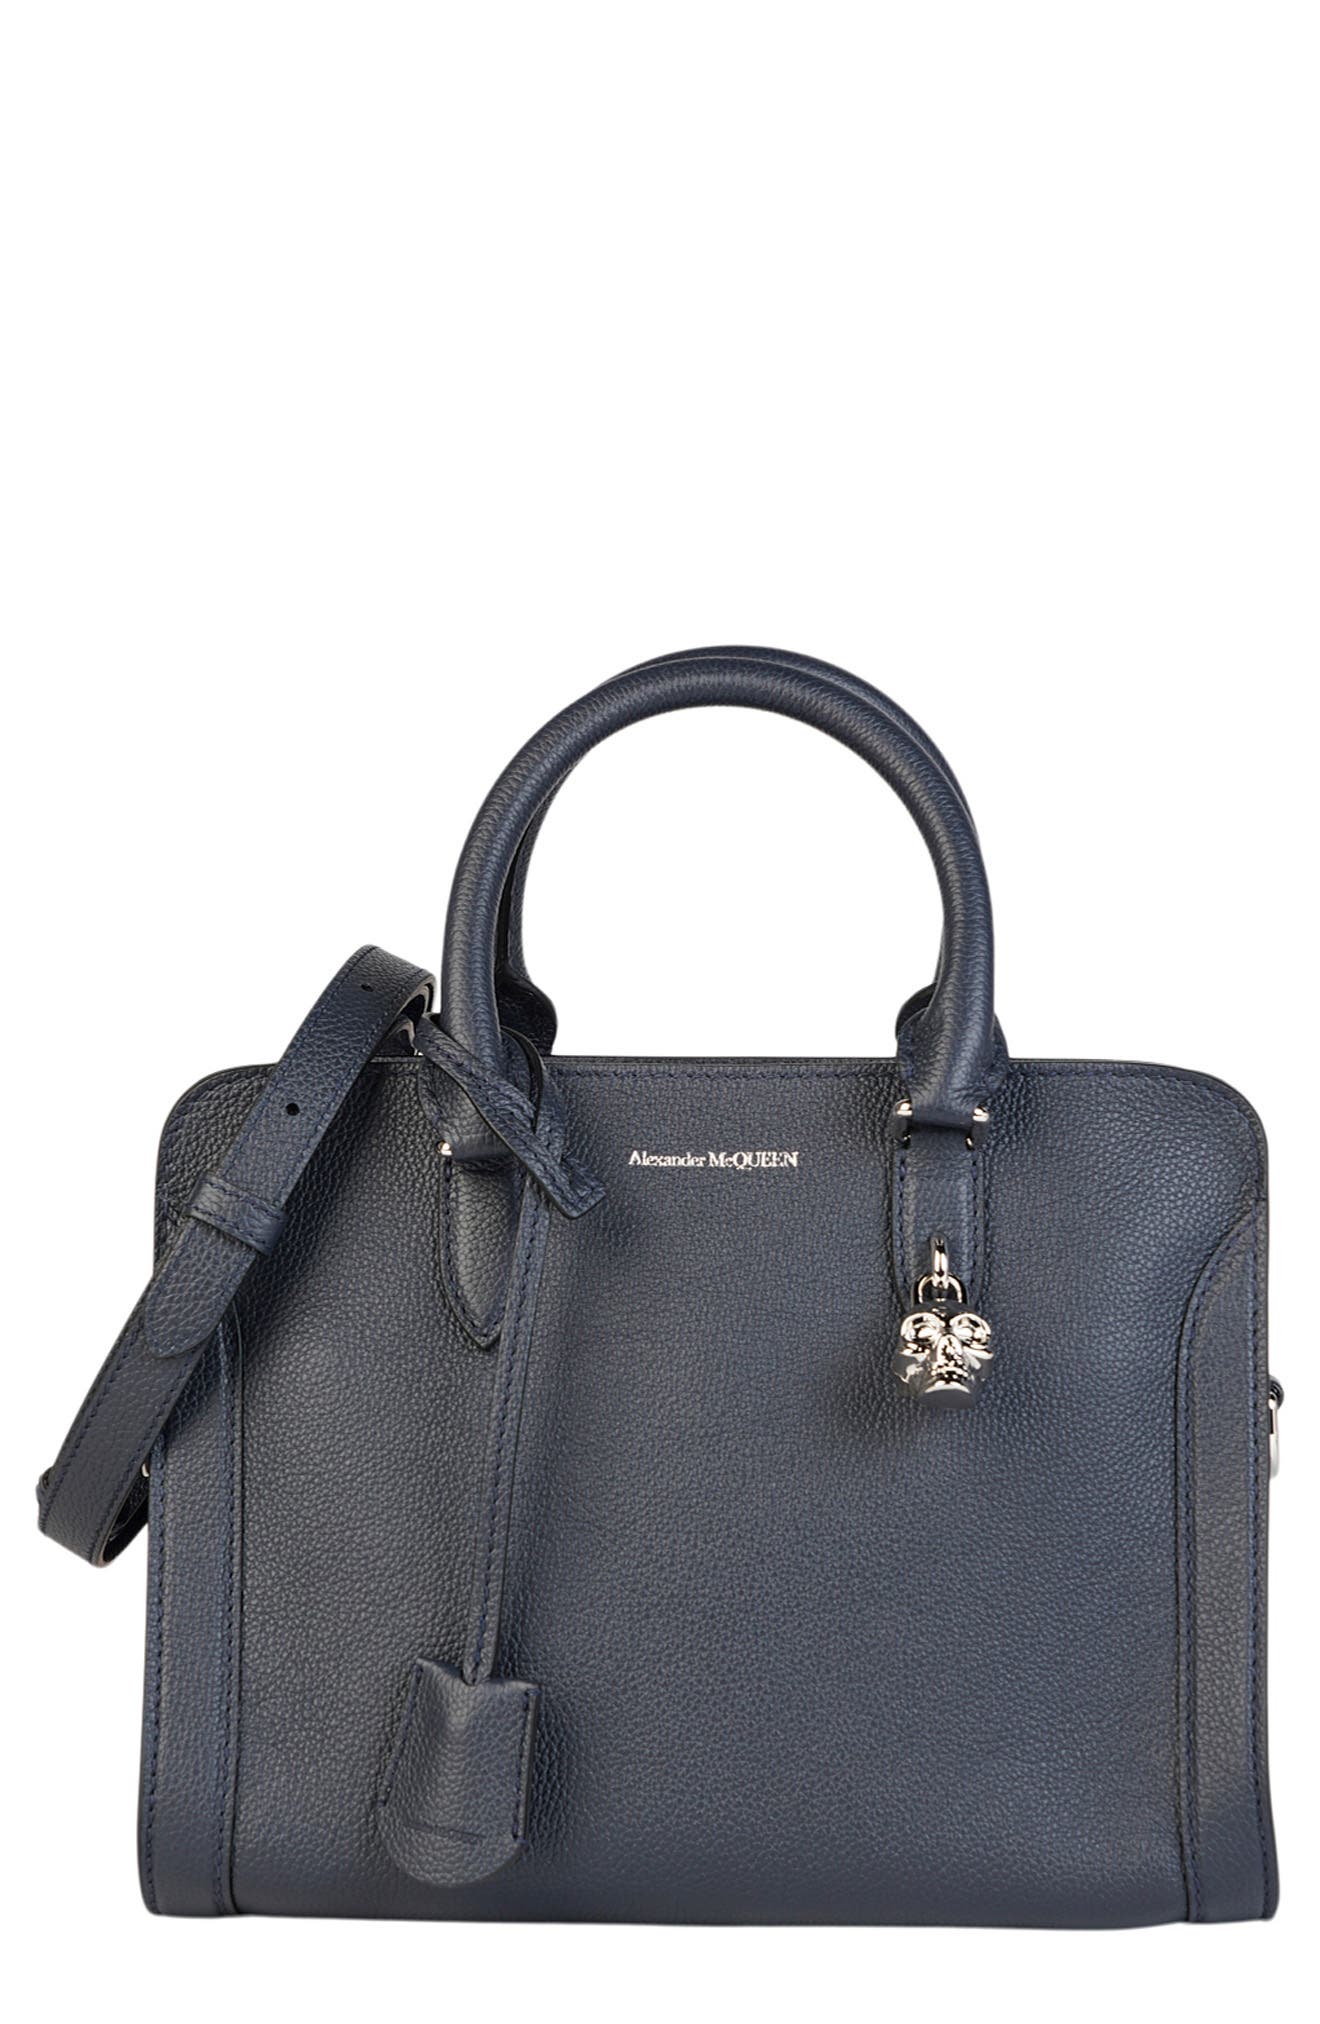 Alexander McQueen Pebbled Leather Tote in Blue Night Womens Bags Tote bags Blue 